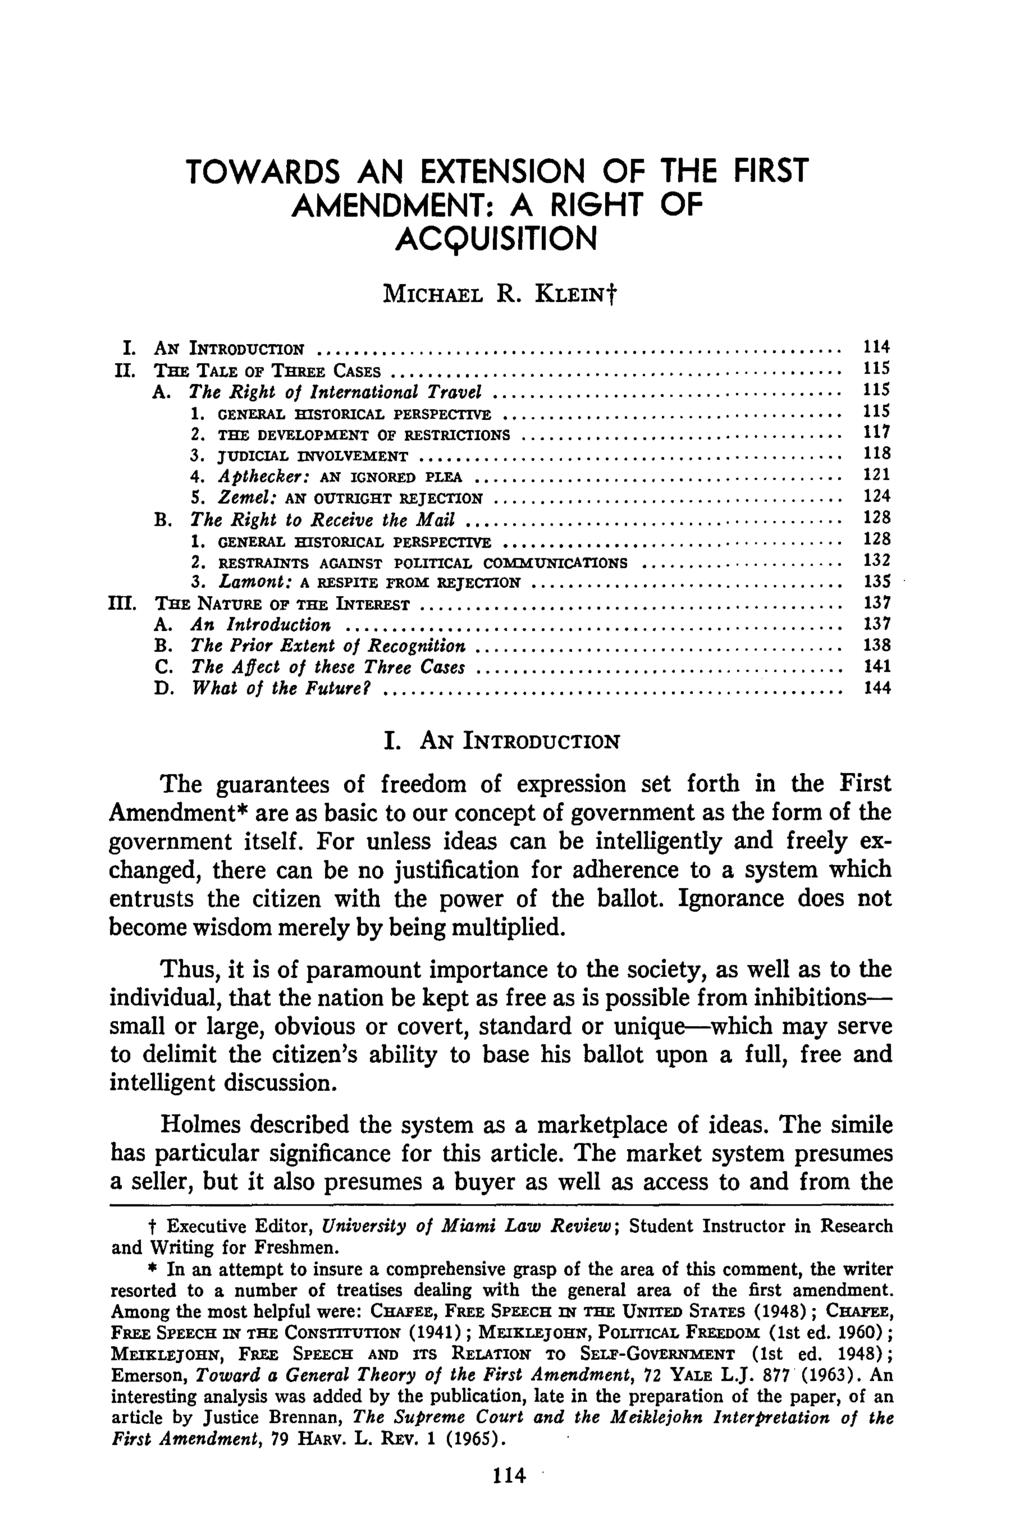 TOWARDS AN EXTENSION OF THE FIRST AMENDMENT: A RIGHT OF ACQUISITION MICHAEL R. KLEINt I. AN INTRODUCTION... 114 II. THE TALE OF THREE CASES... 115 A. The Right oj International Travel... 115 1.